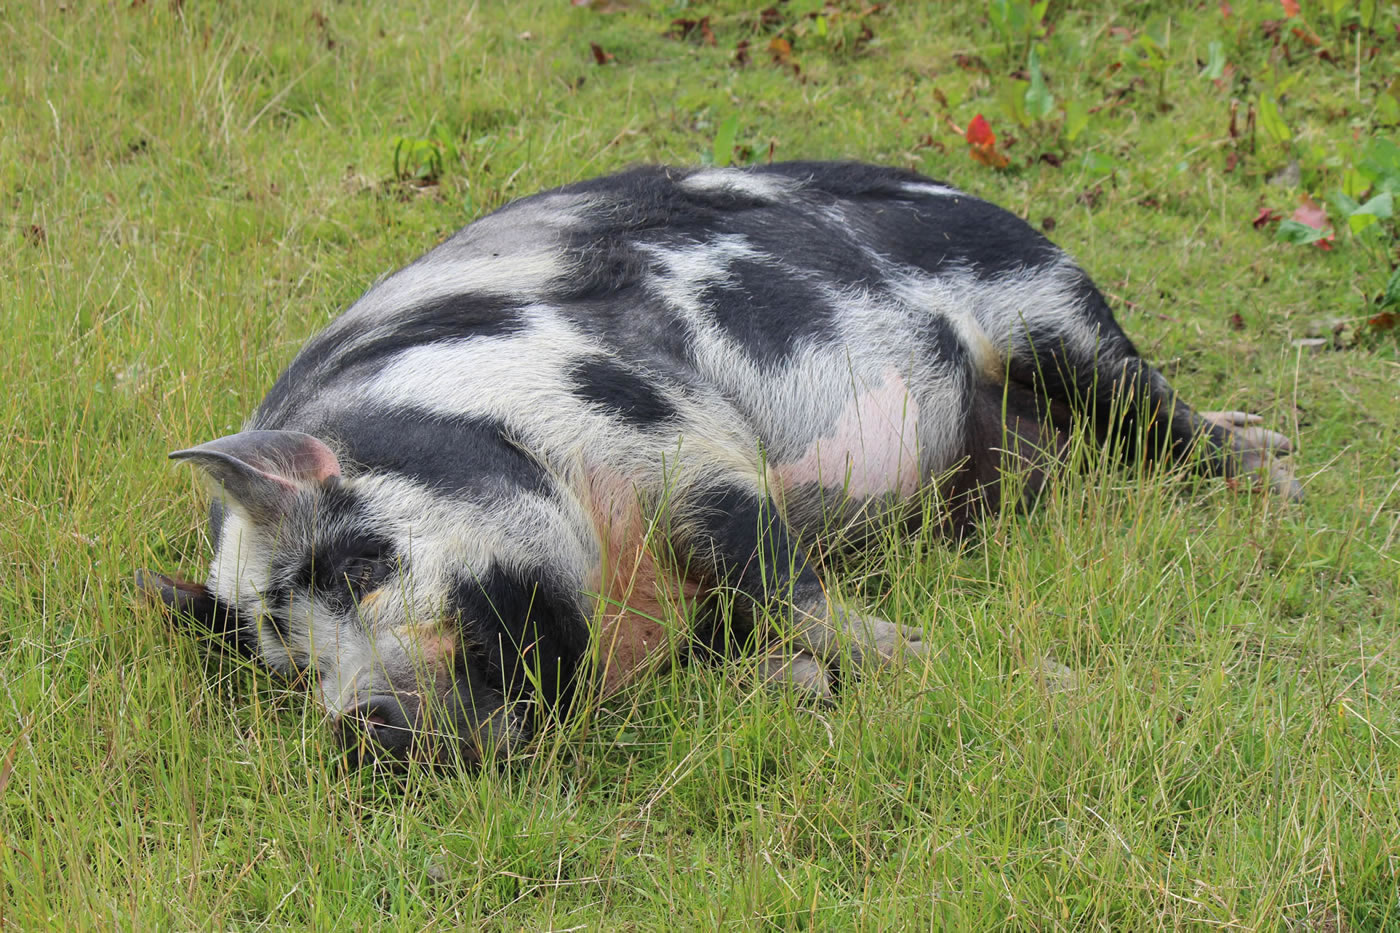 Picture of our kunekune pig - Geordie, lying on grass enjoying the sunshine